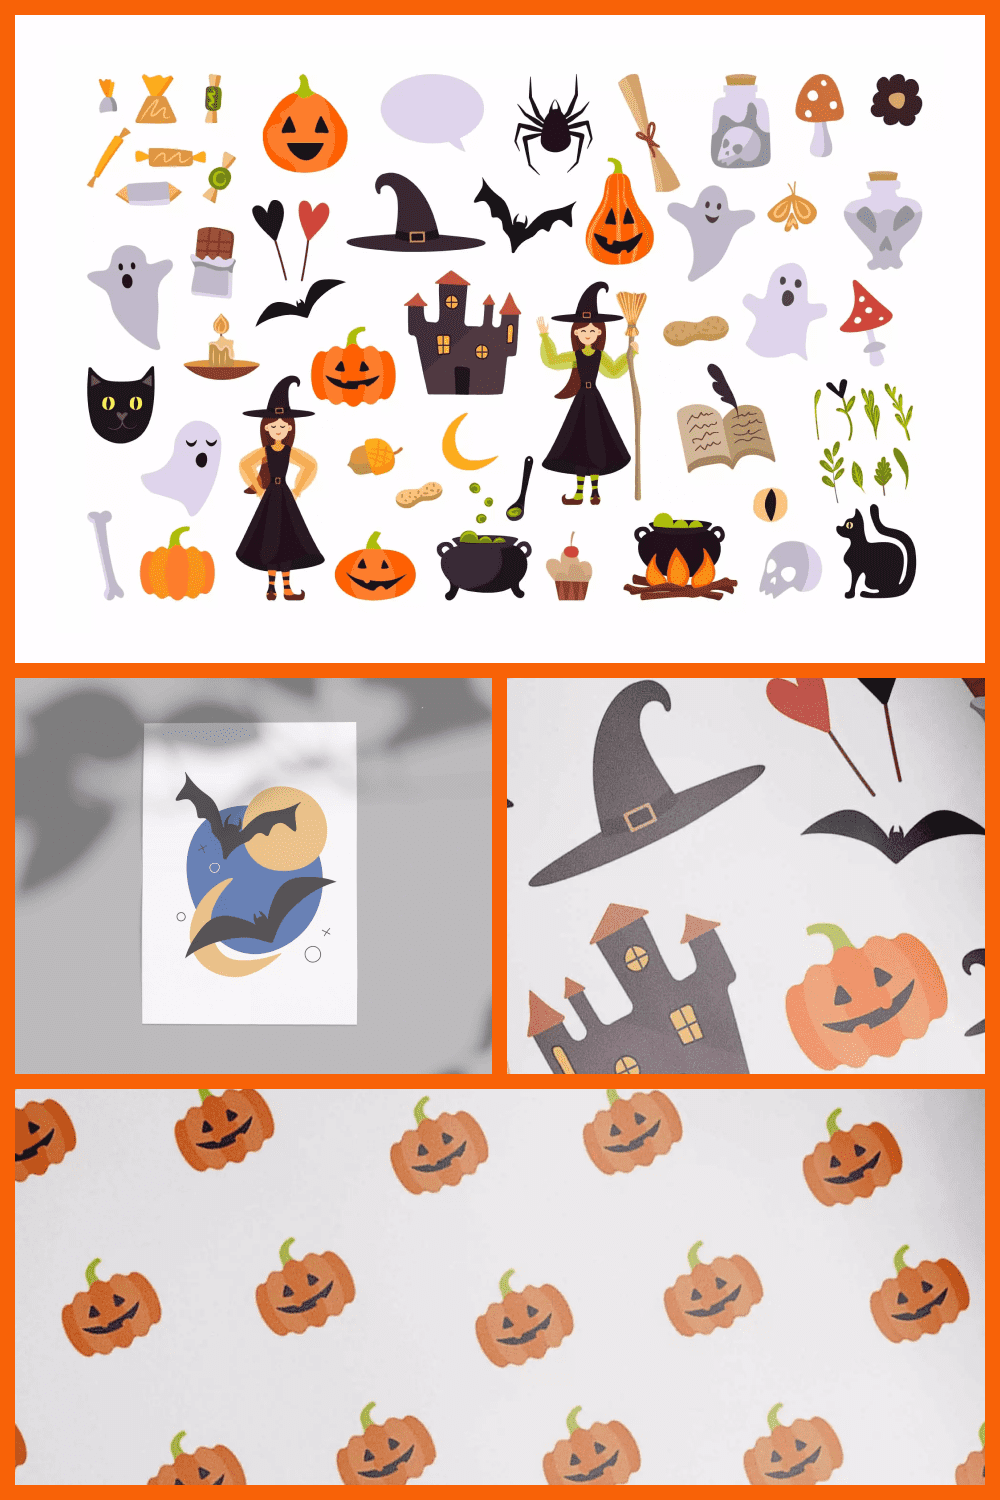 Collage of drawn pumpkins, witches, cauldrons, ghosts on a white background.